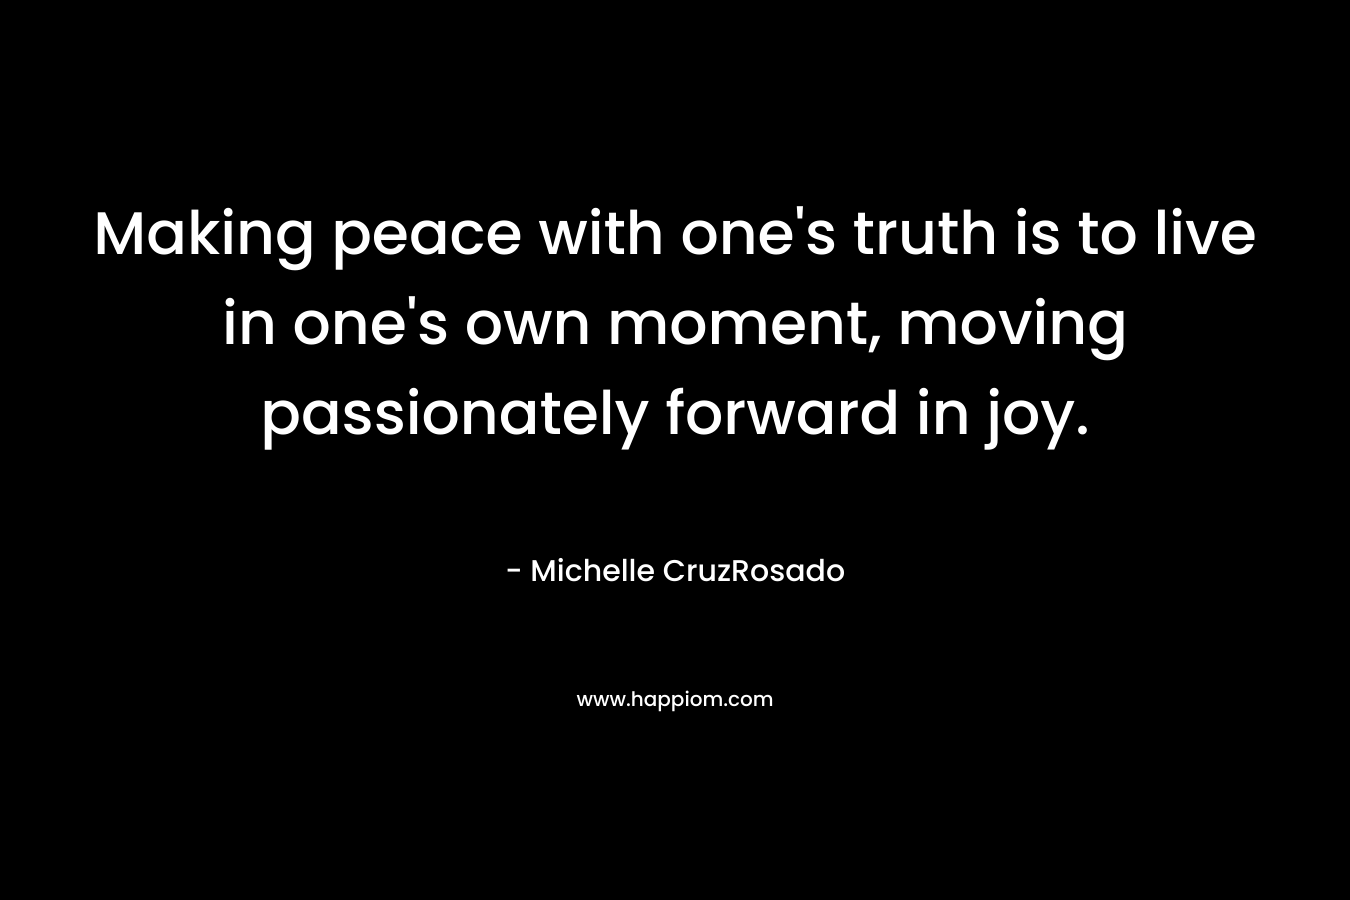 Making peace with one's truth is to live in one's own moment, moving passionately forward in joy.